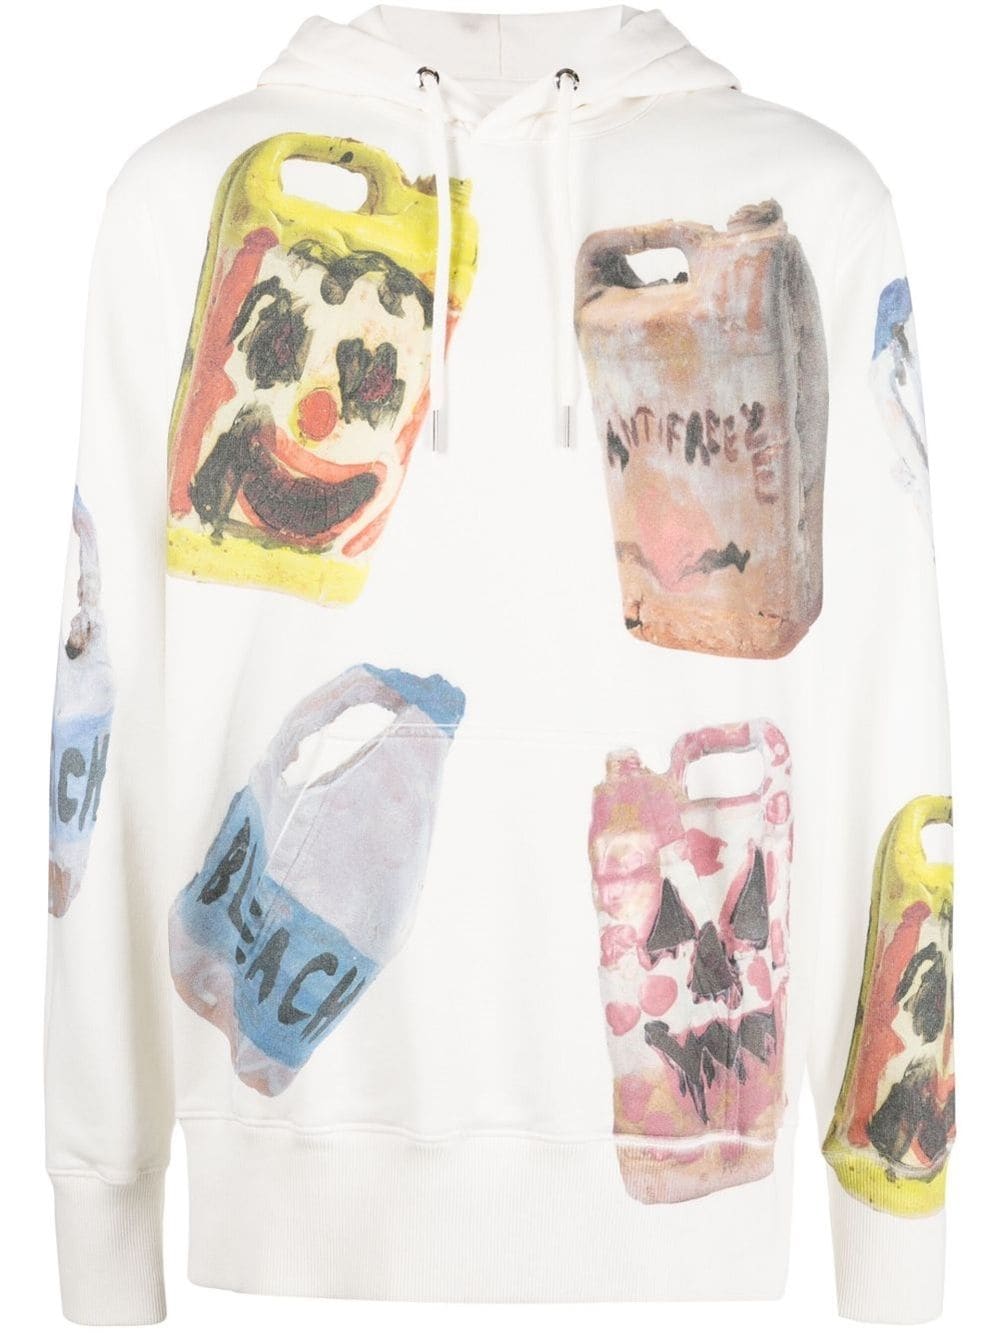 X Josh Smith printed layered cotton top by GIVENCHY